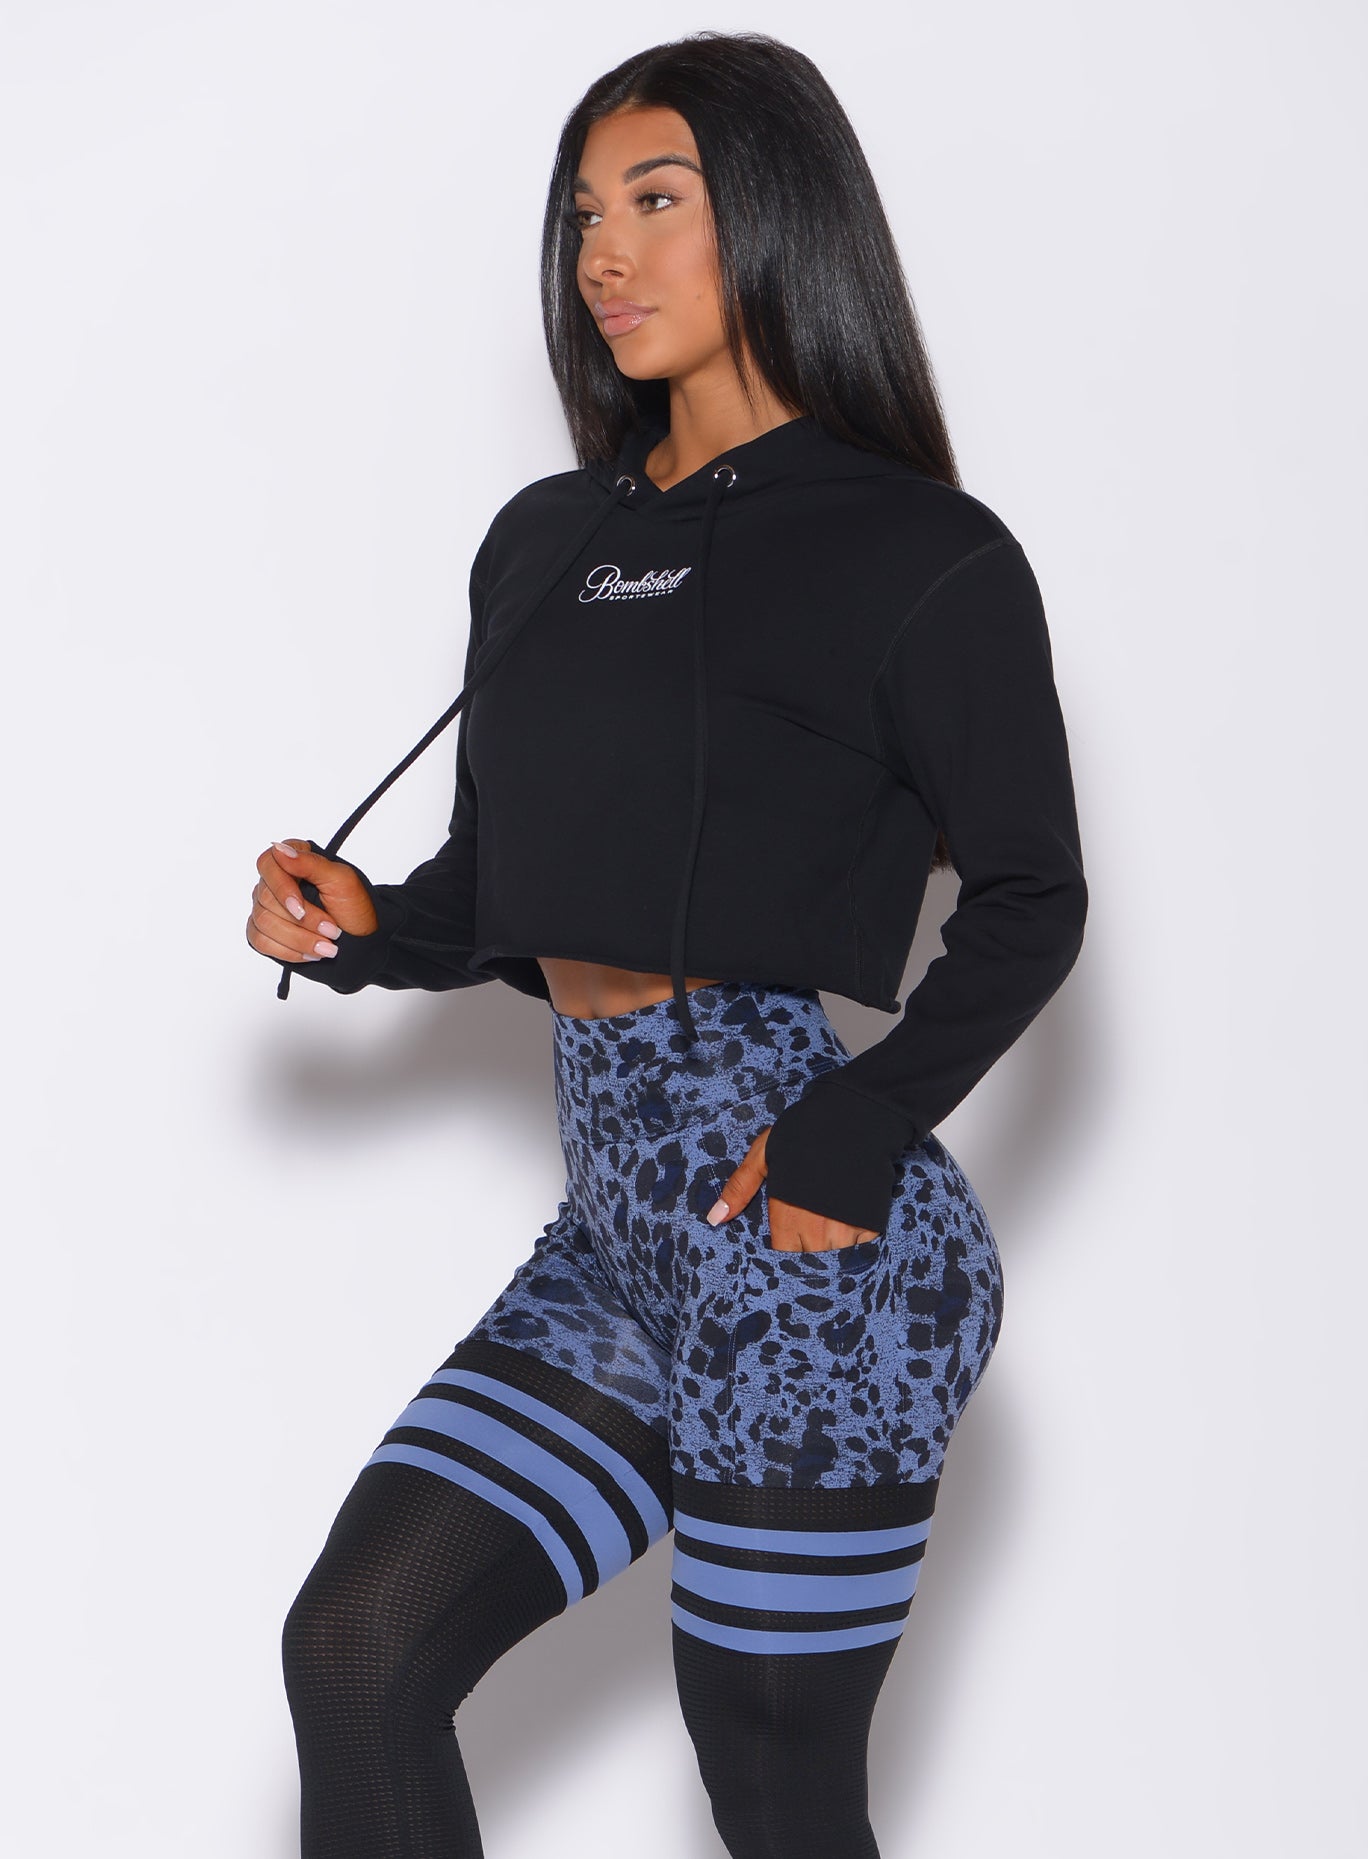 Left side  profile view of a model angled left wearing  our black bombshell hoodie and a cheetah print leggings